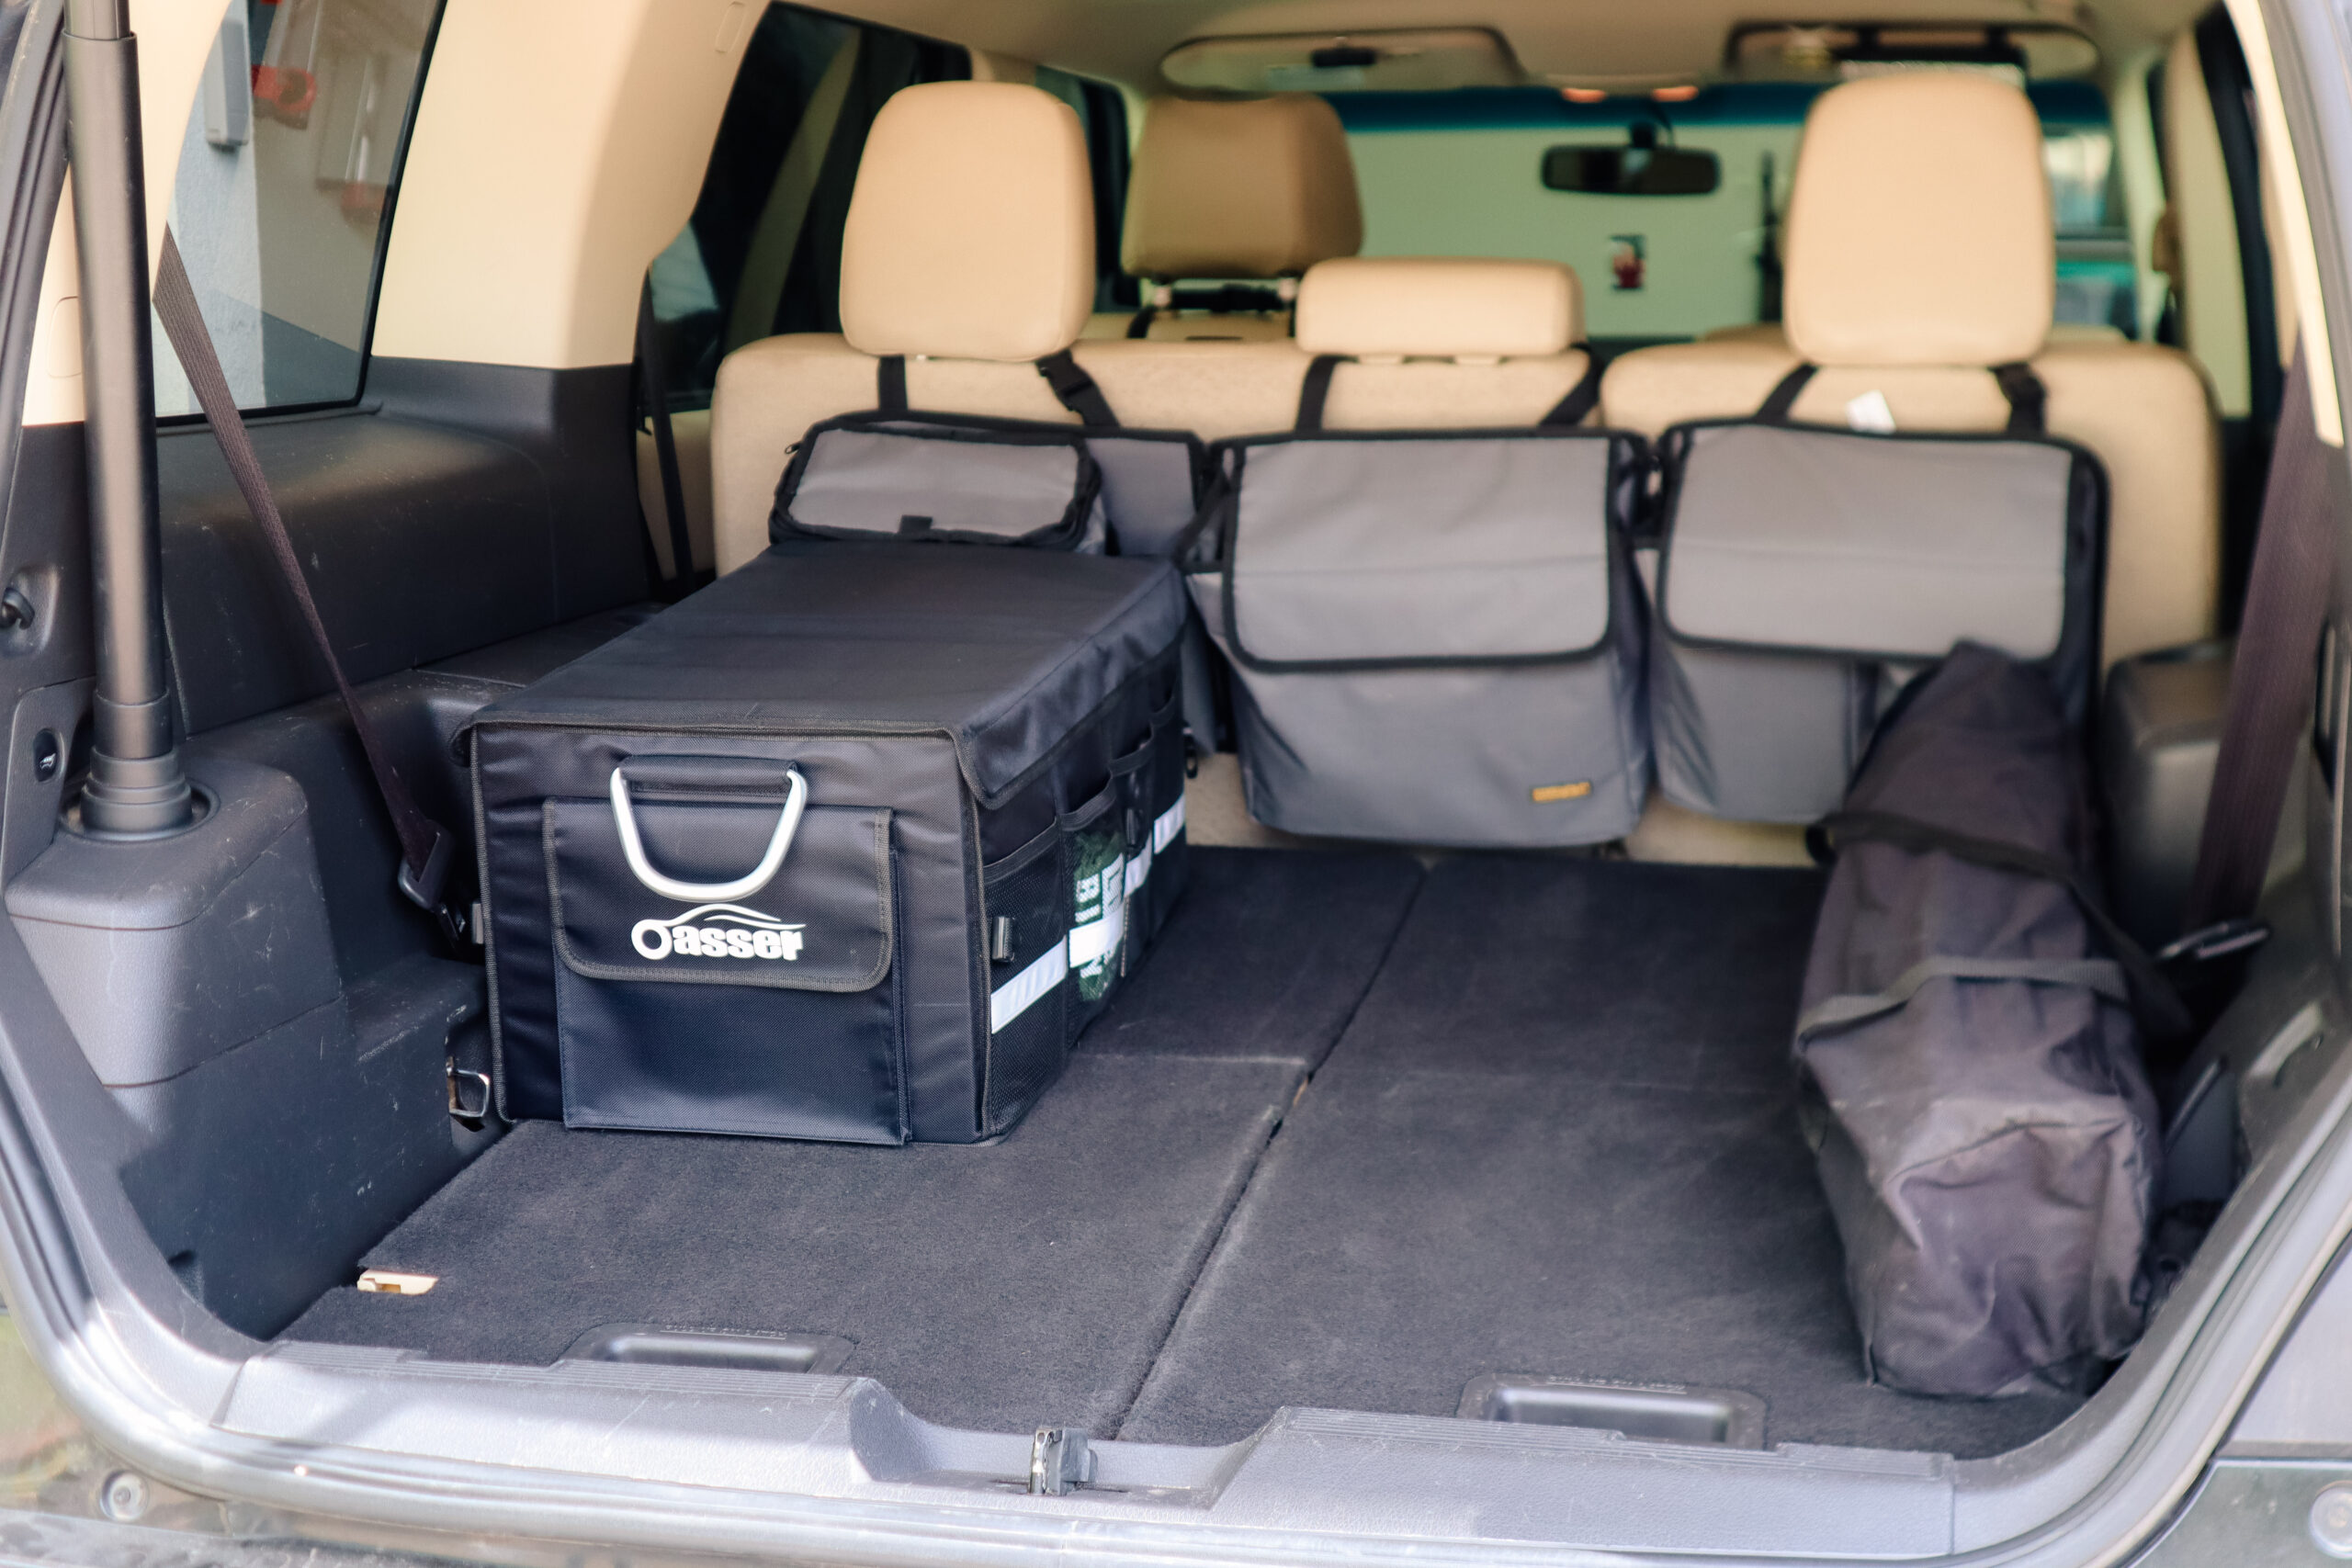 How to Organize Your Trunk: 5 Simple Solutions